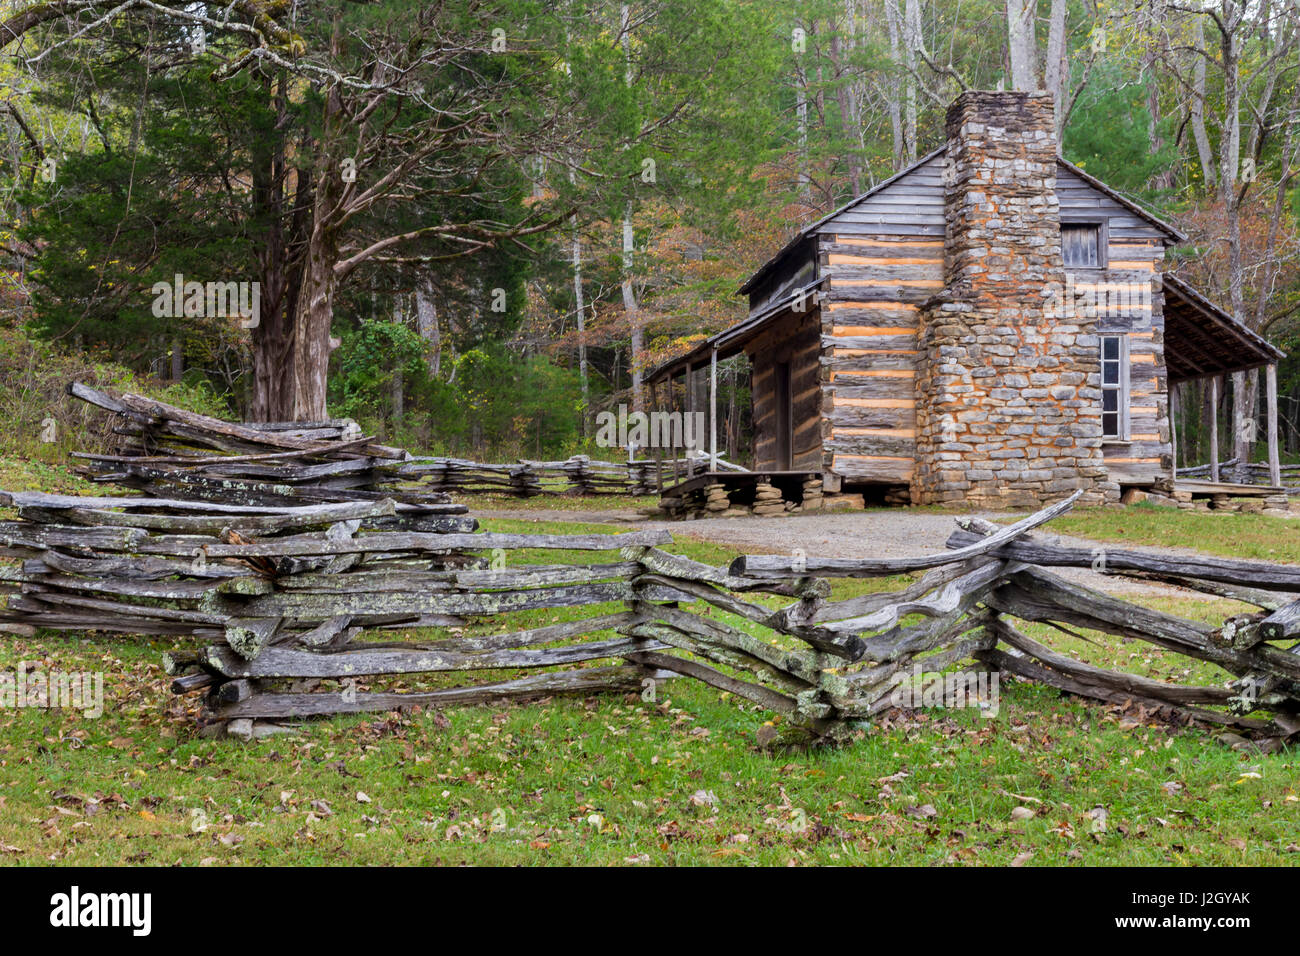 USA, Tennessee, Great Smoky Mountains National Park. John Oliver Place in Cades Cove. Credit as: Don Paulson / Jaynes Gallery / DanitaDelimont.com Stock Photo